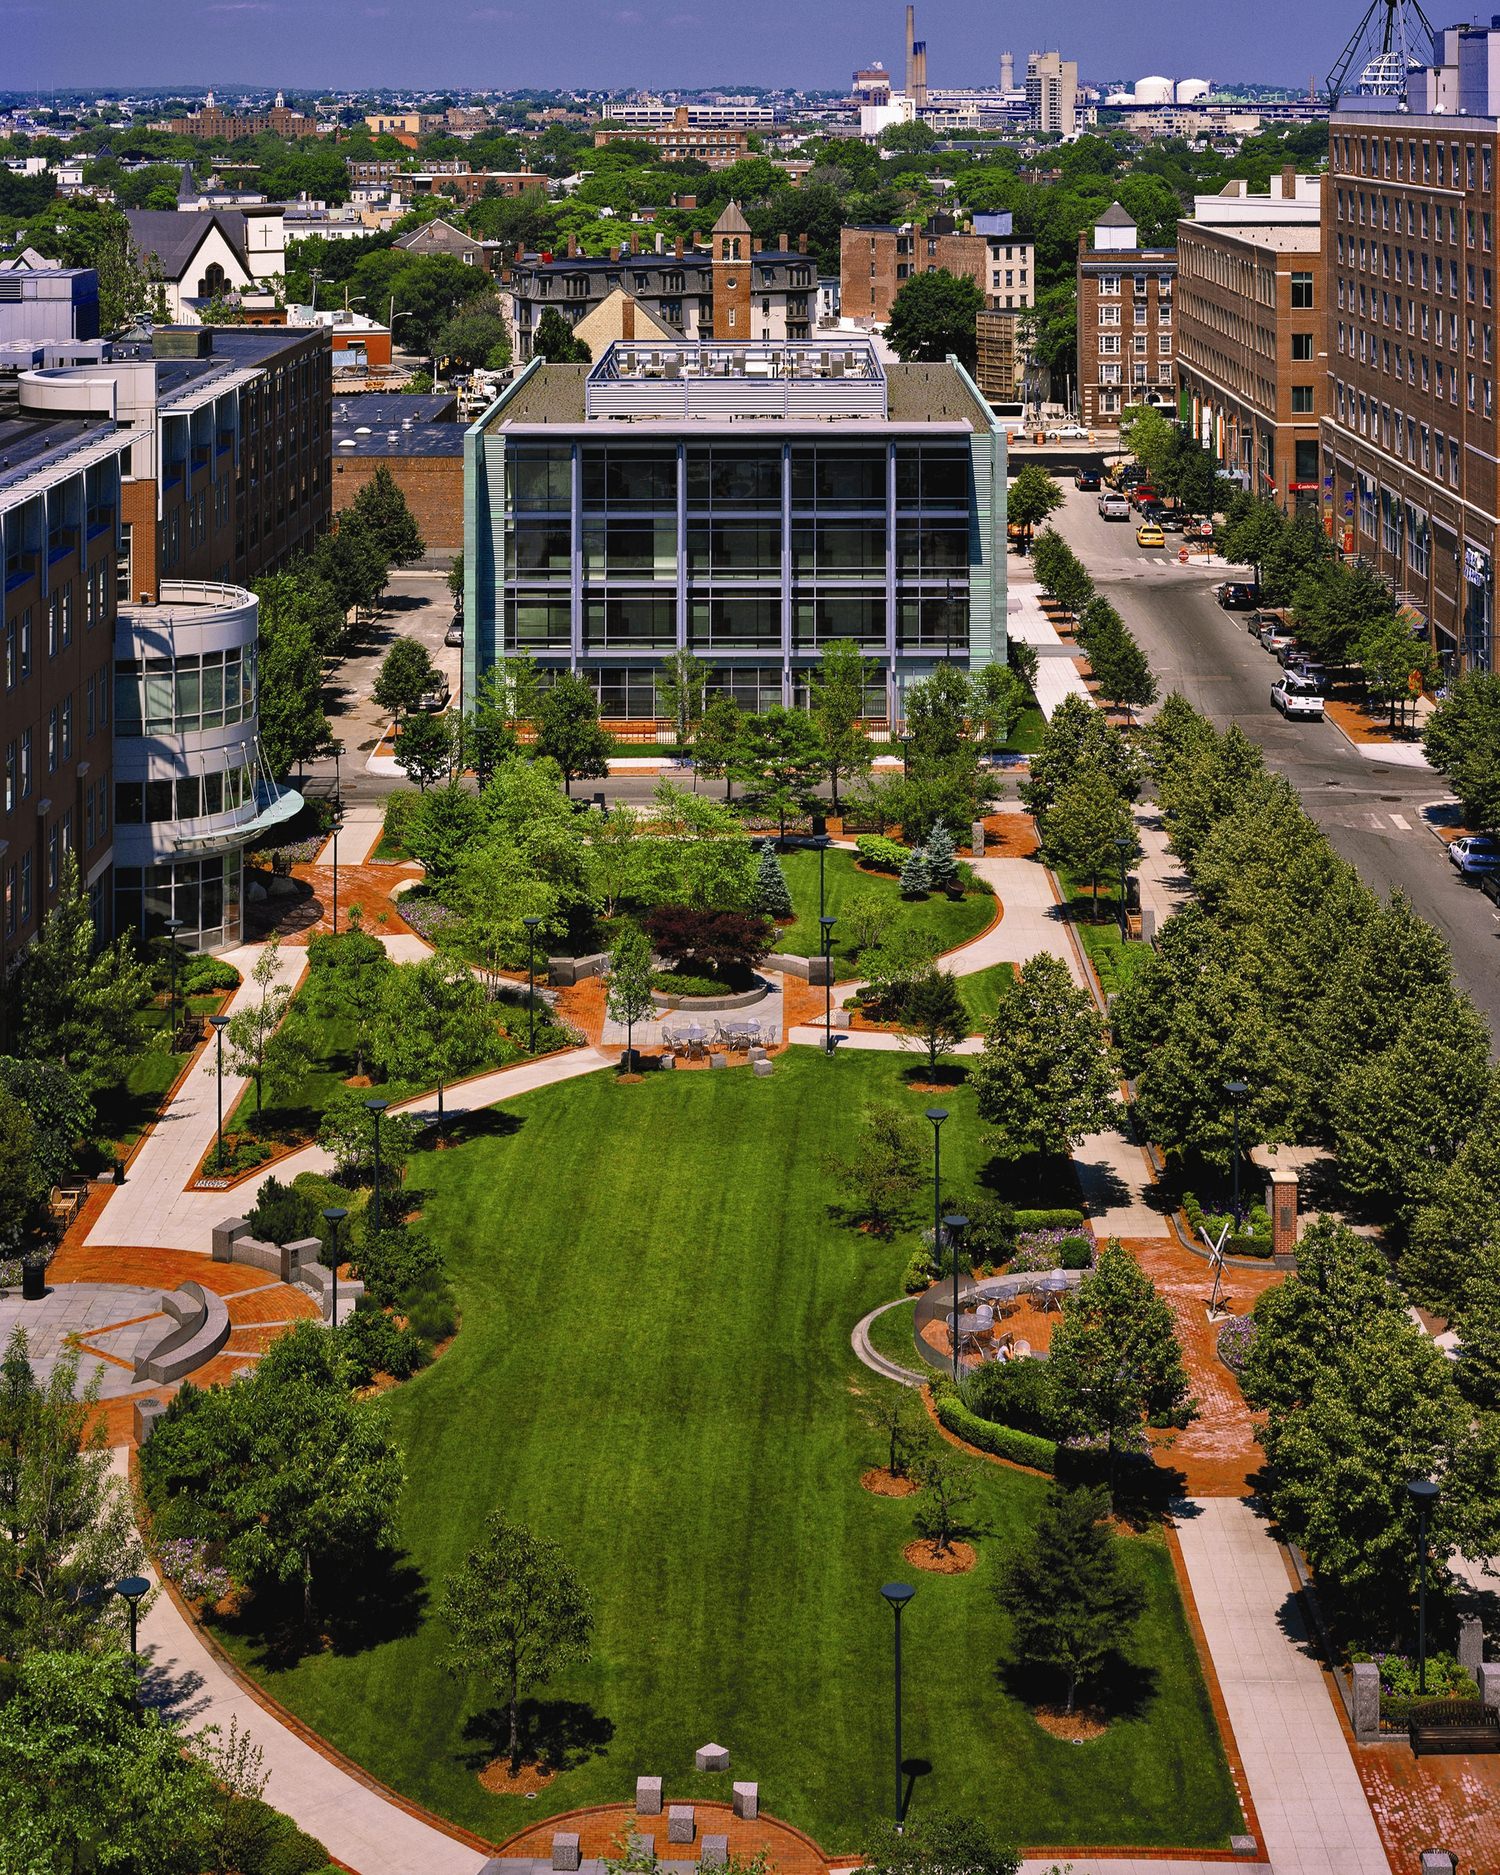 A large courtyard full of grass and trees lining the sides of the walkways towards the buildings.